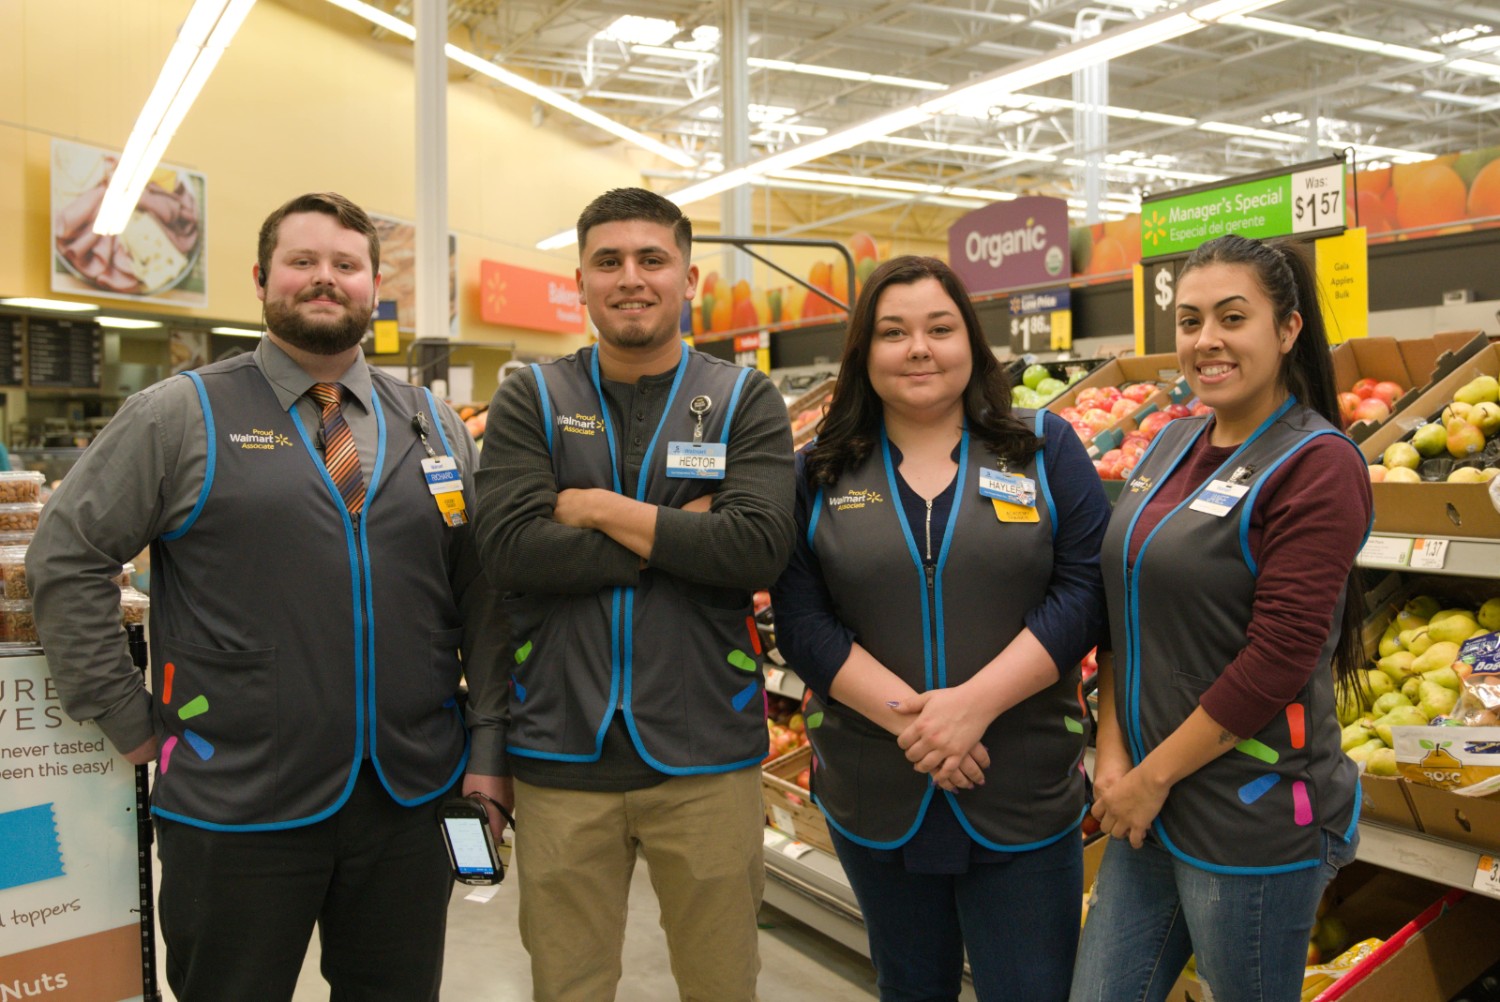 Why Do 1.4 Million Americans Work At Walmart, With Many More